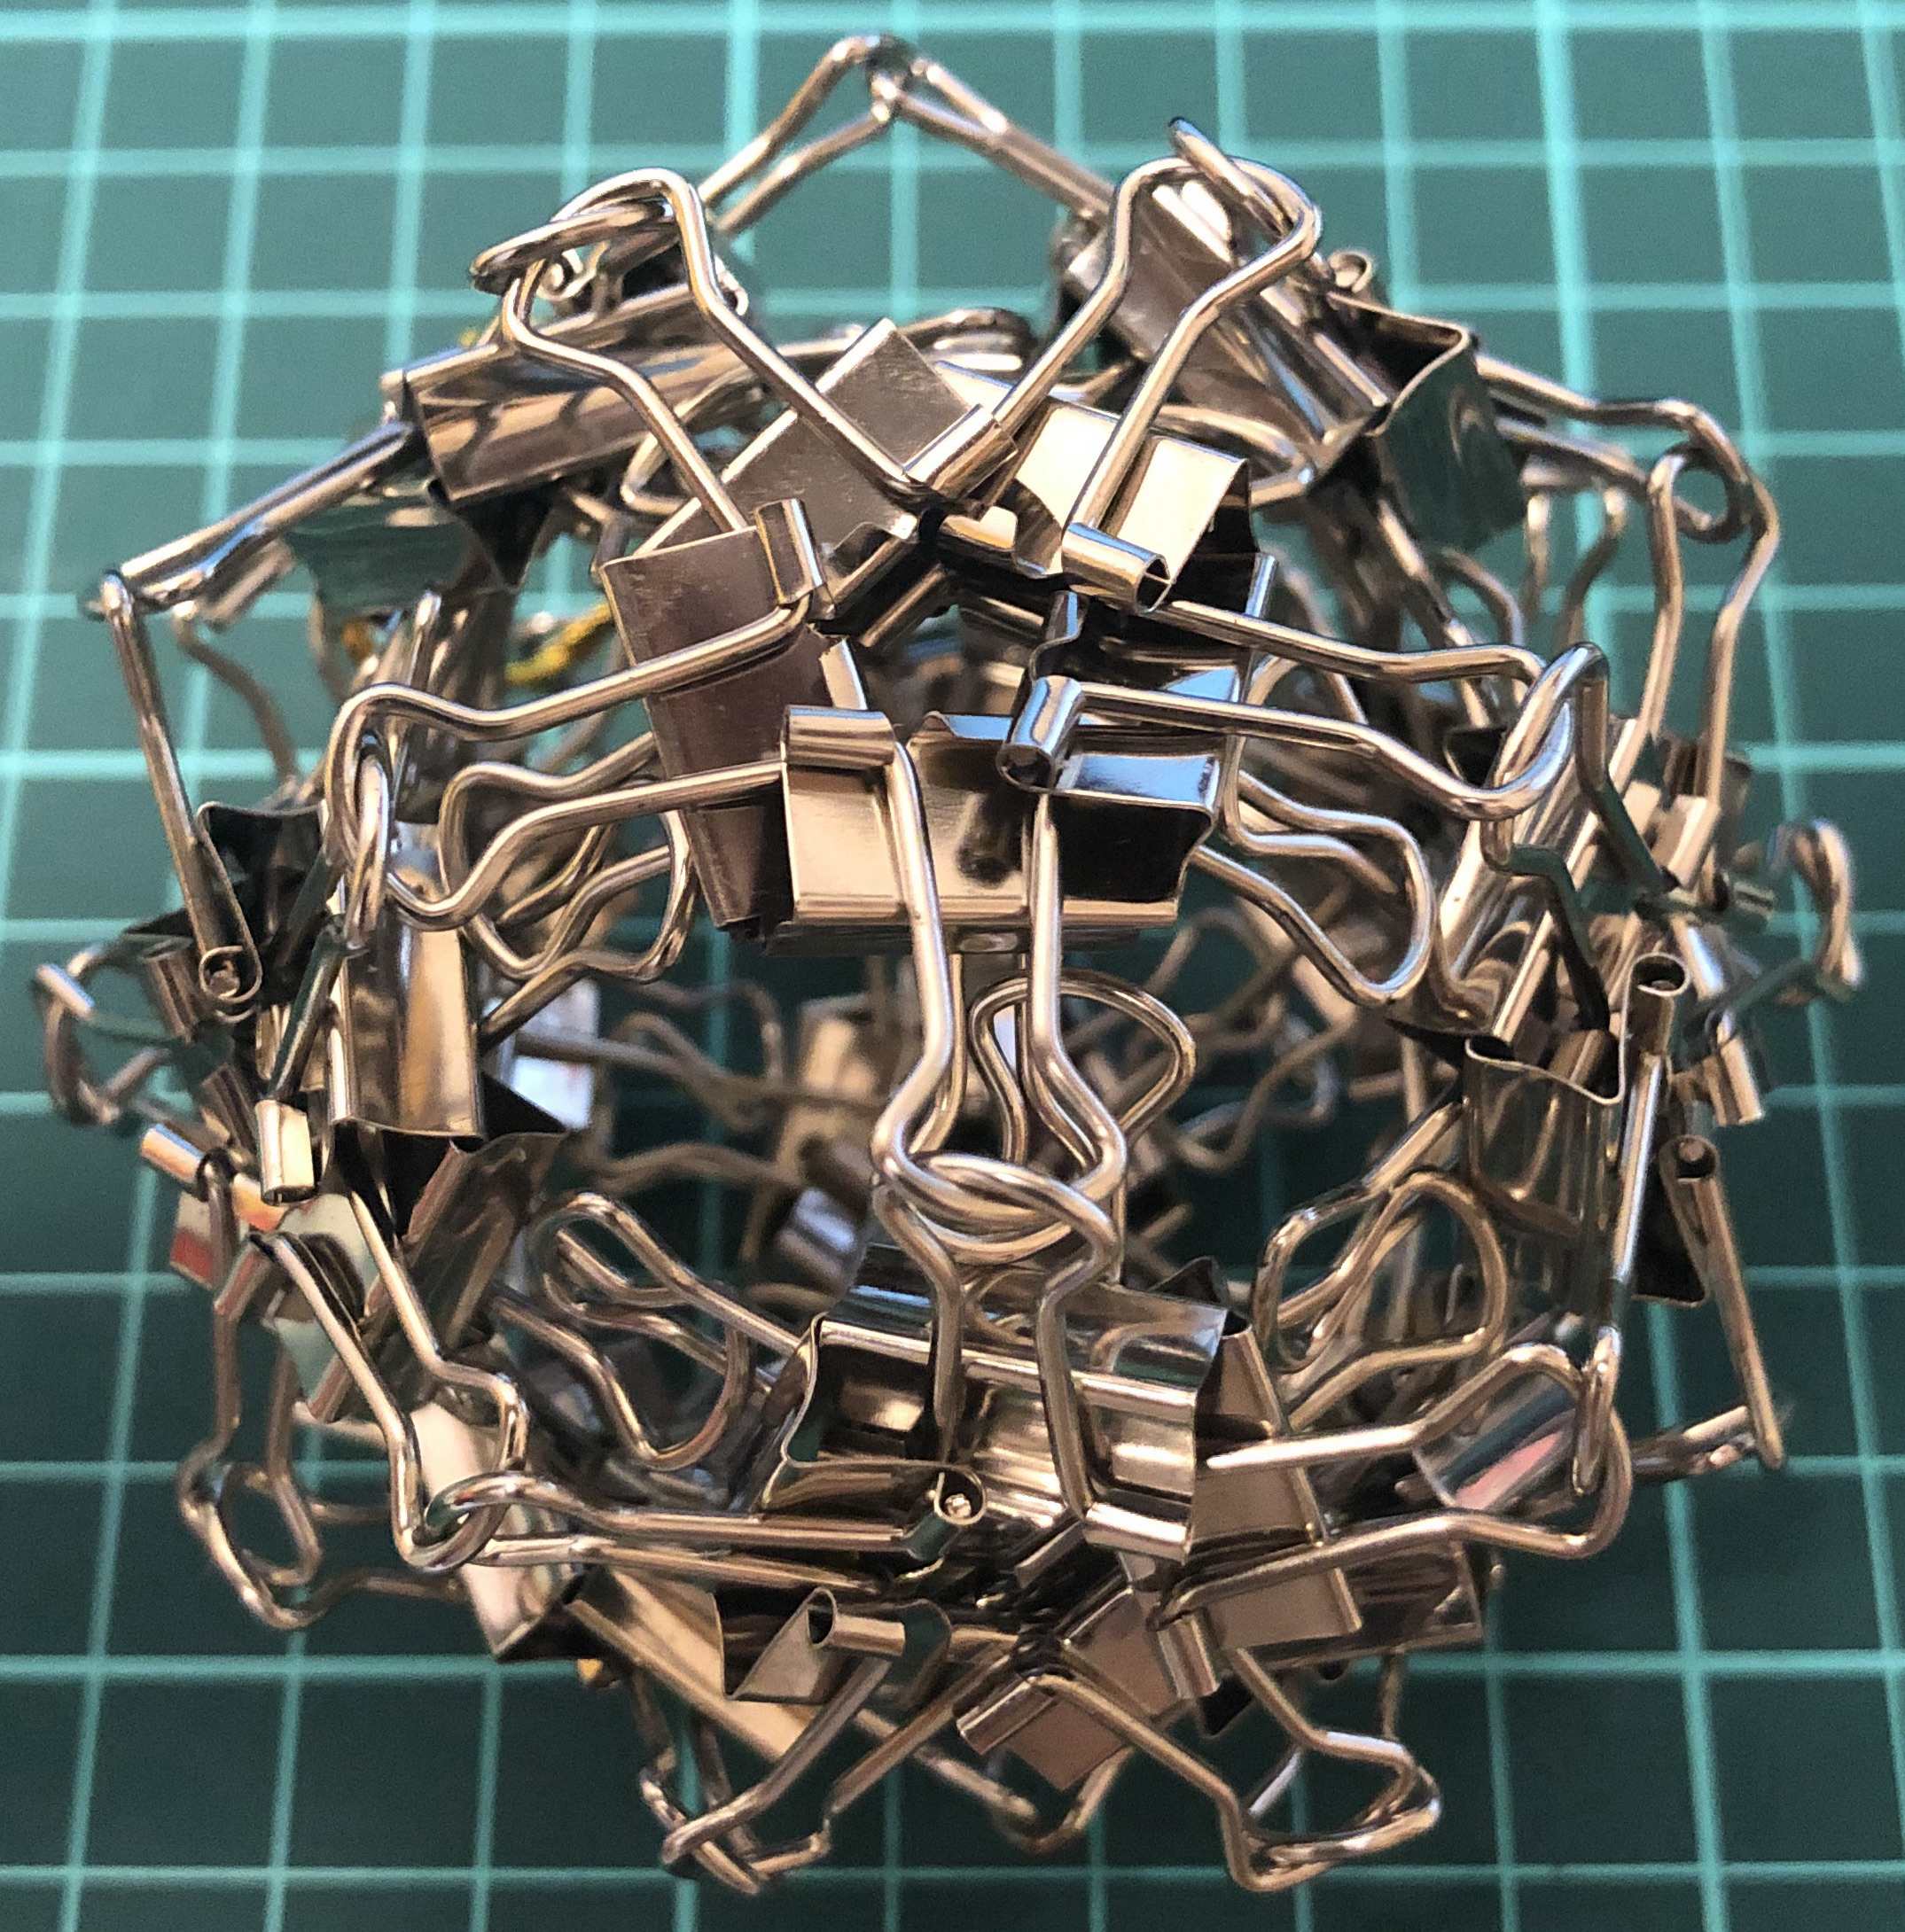 60 clips forming 30 W-edges forming icosahedron